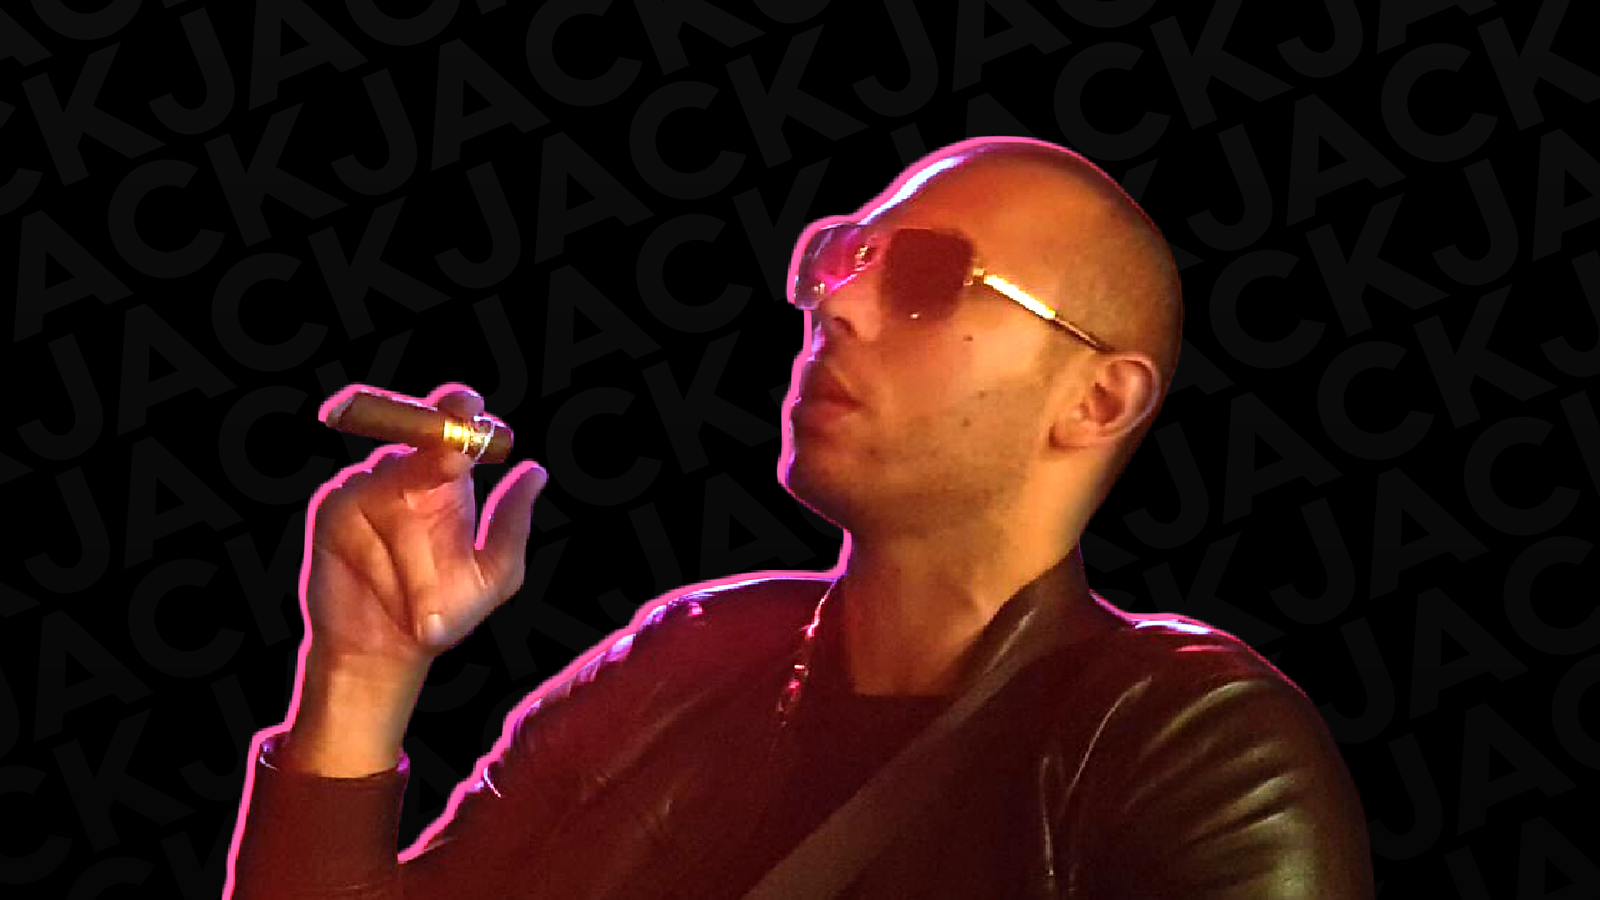 Andrew Tate with sunglasses and black leather jacket while holding a cigar